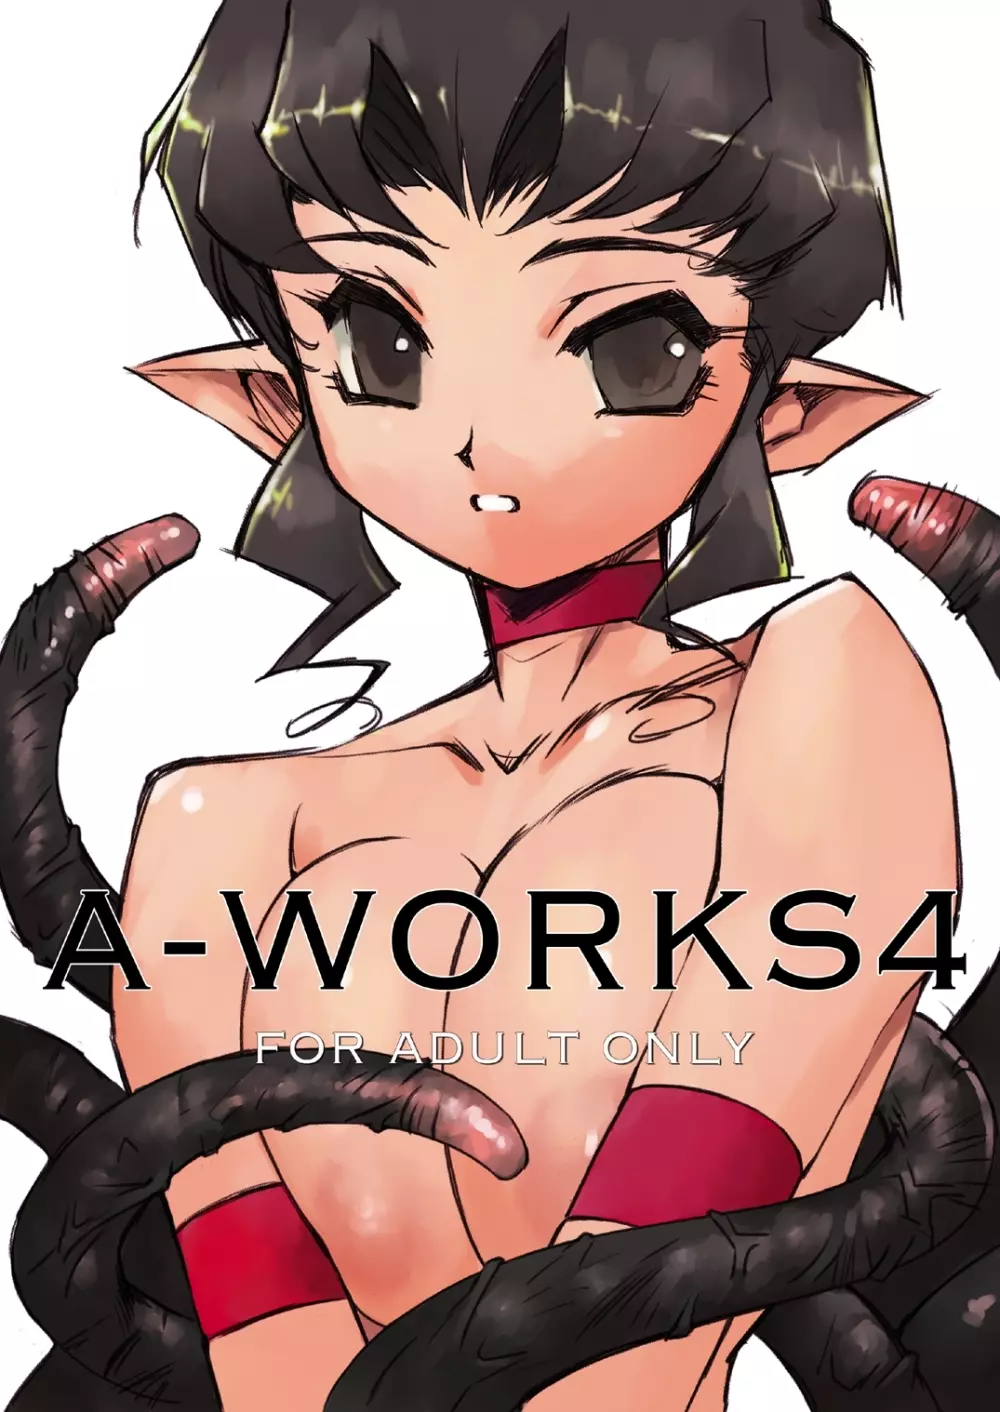 A-WORKS4